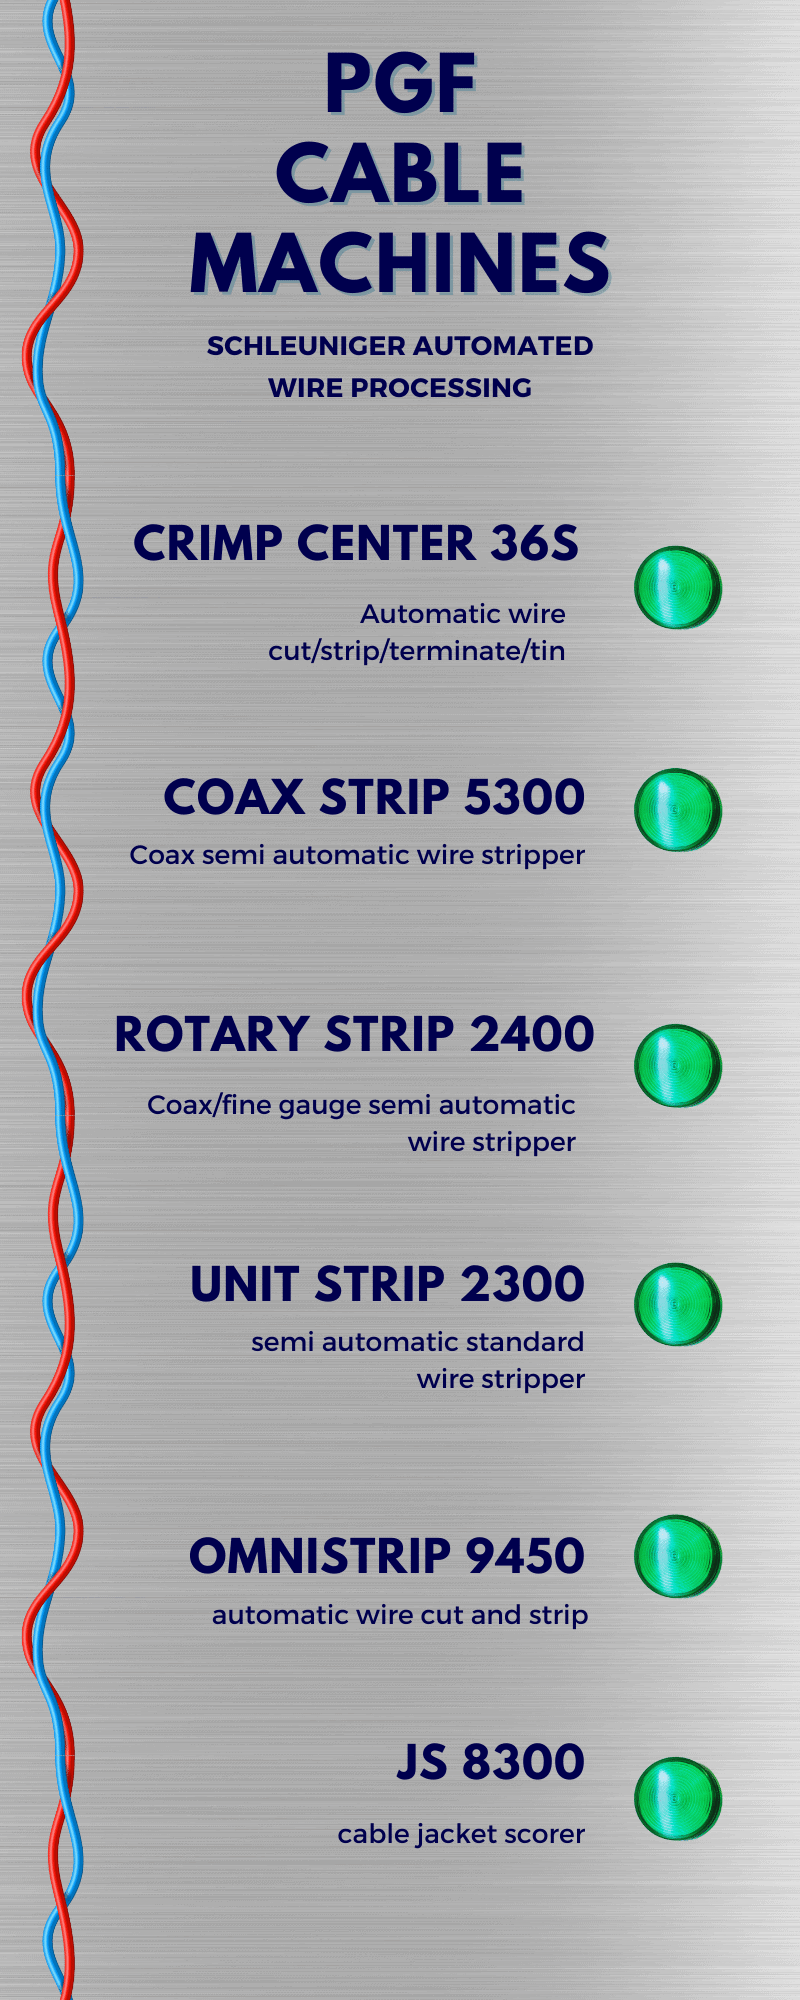 cable machines infographic